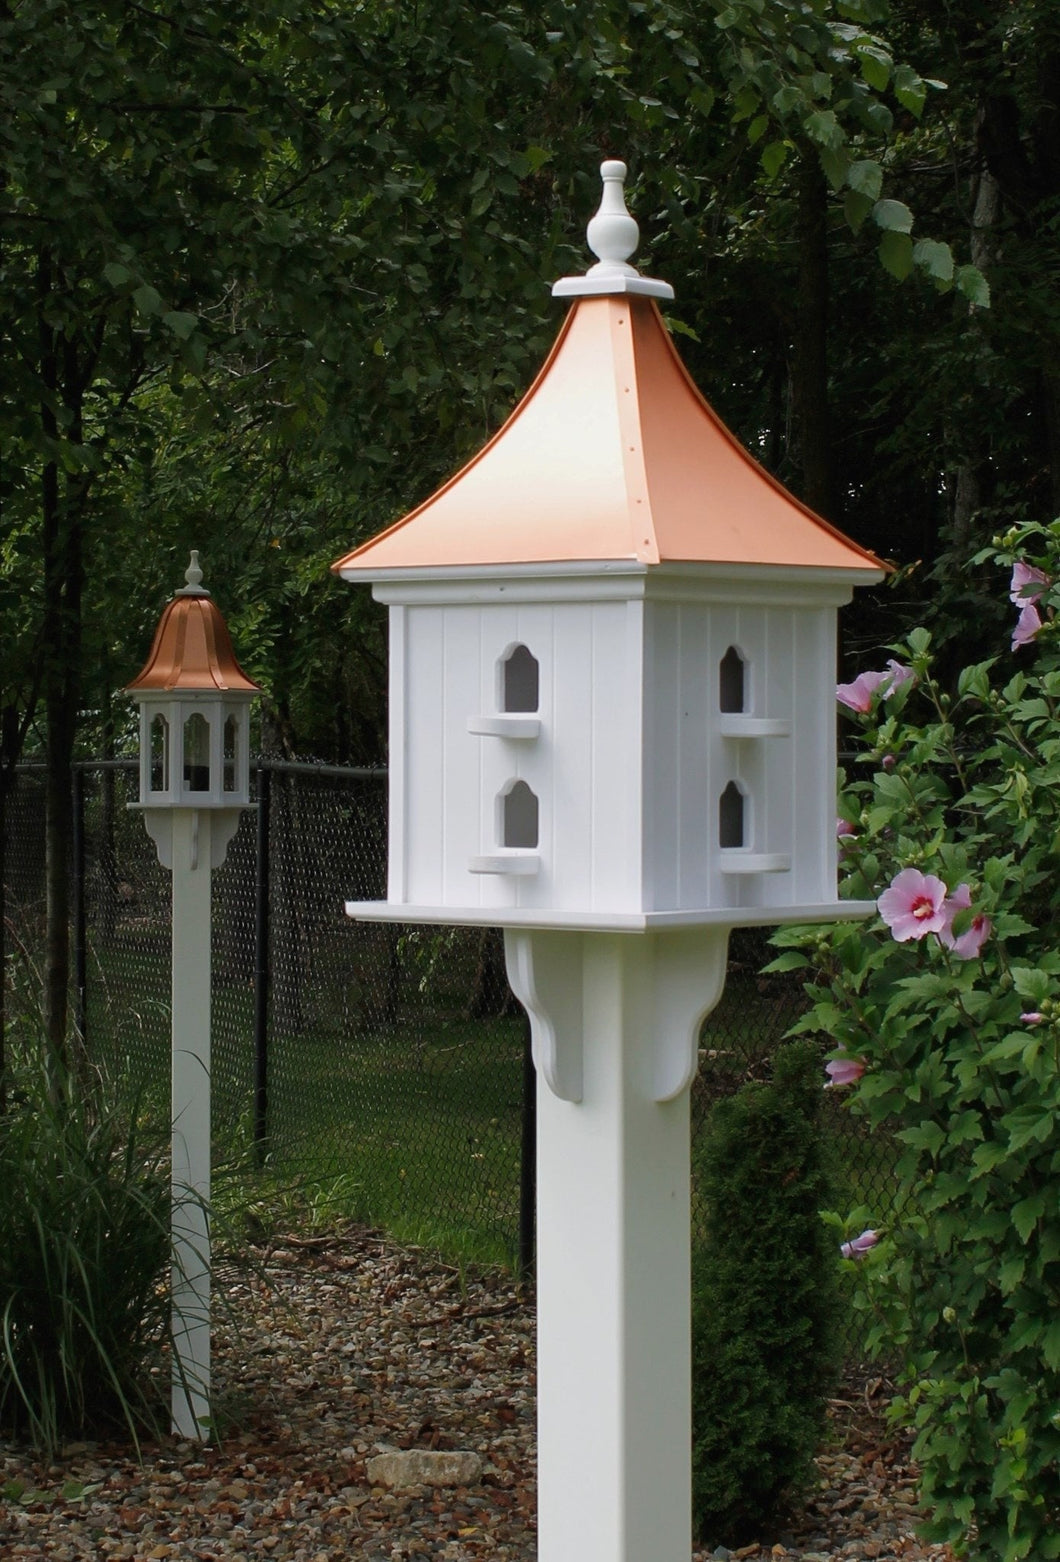 Purple Martin Birdhouse White with Copper Roof BH06 Bird Lover's Gift